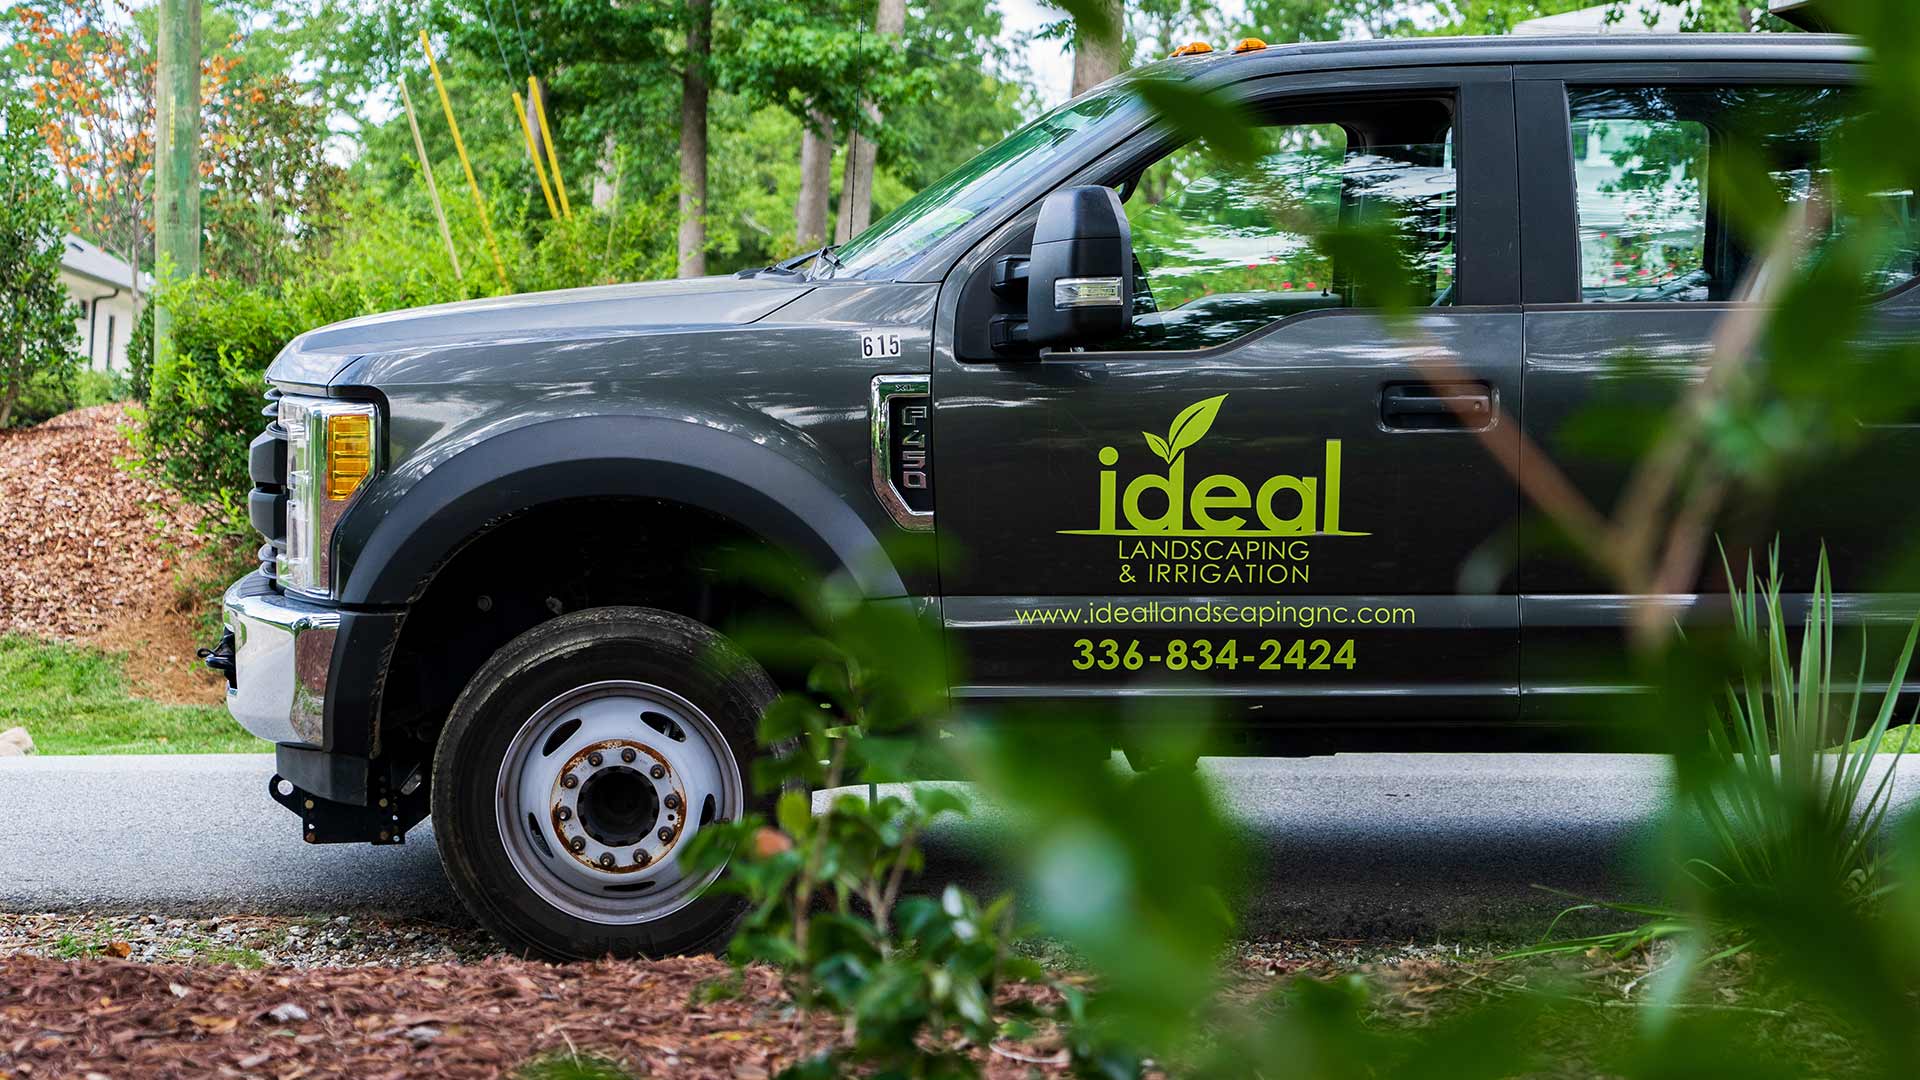 Ideal Landscaping & Irrigation service truck at a home in Greensboro, NC.